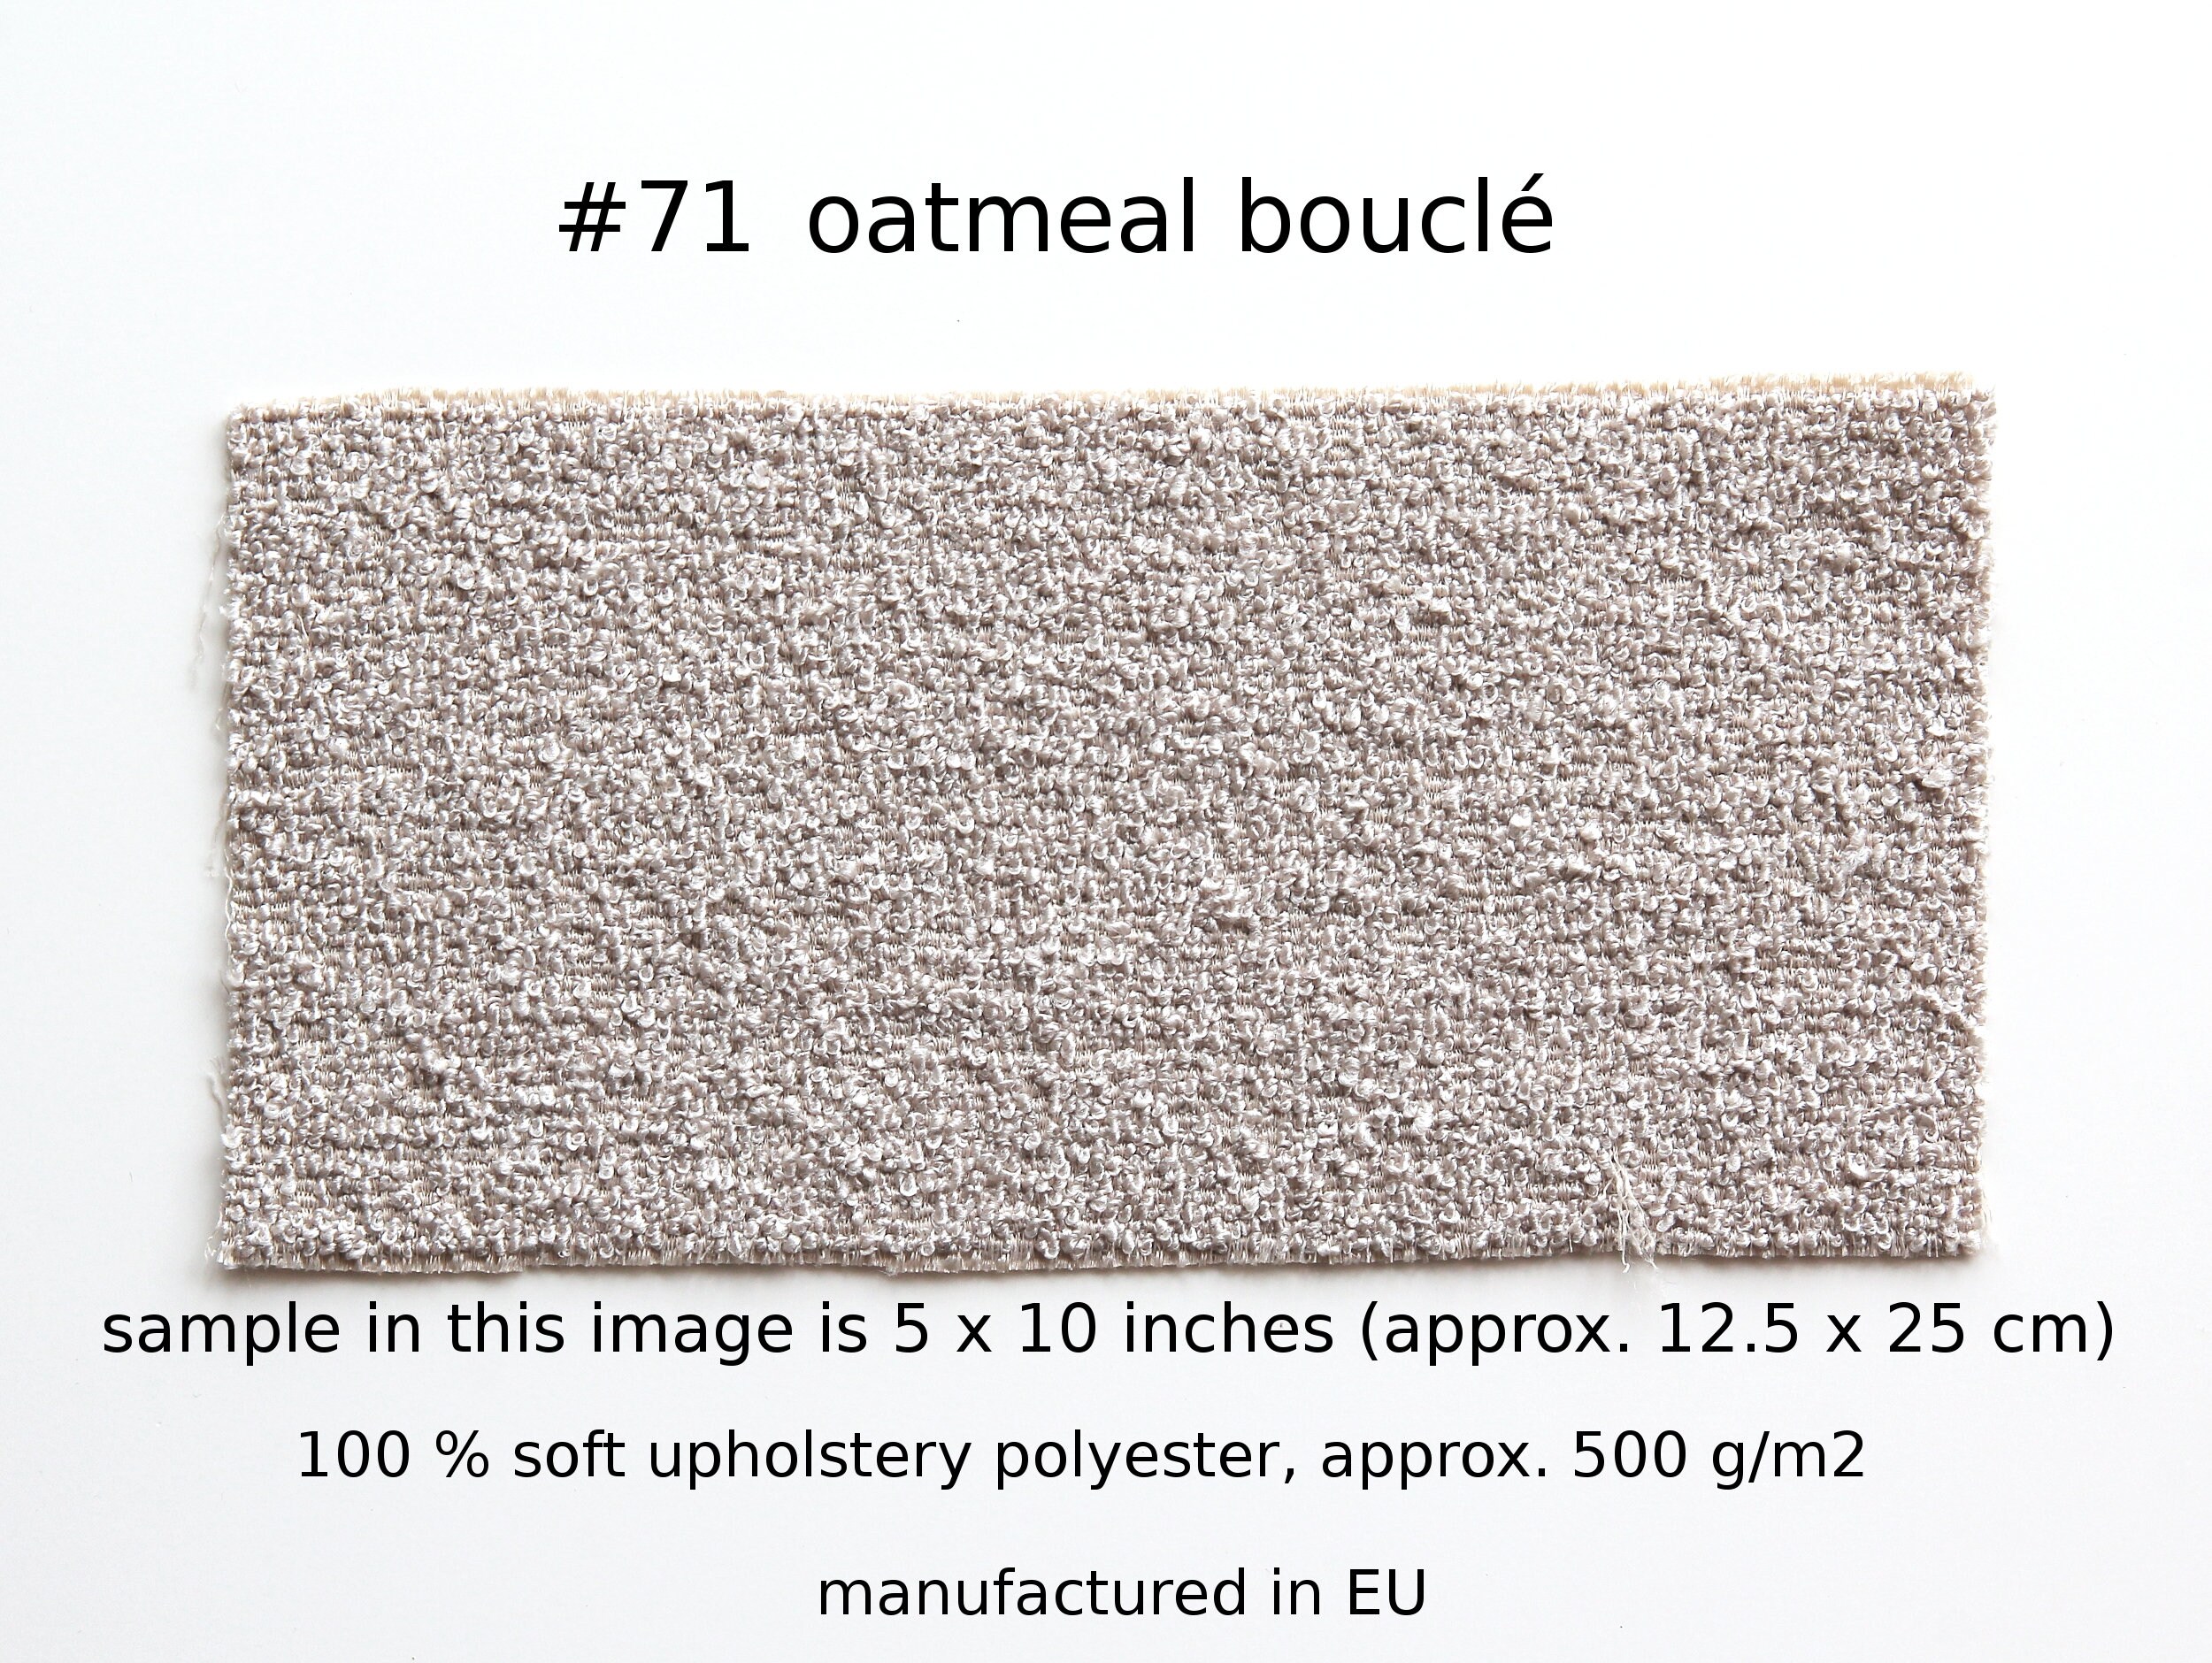 71 Oatmeal boucle fabric by the meter or by the yard for modern upholstery and home decor